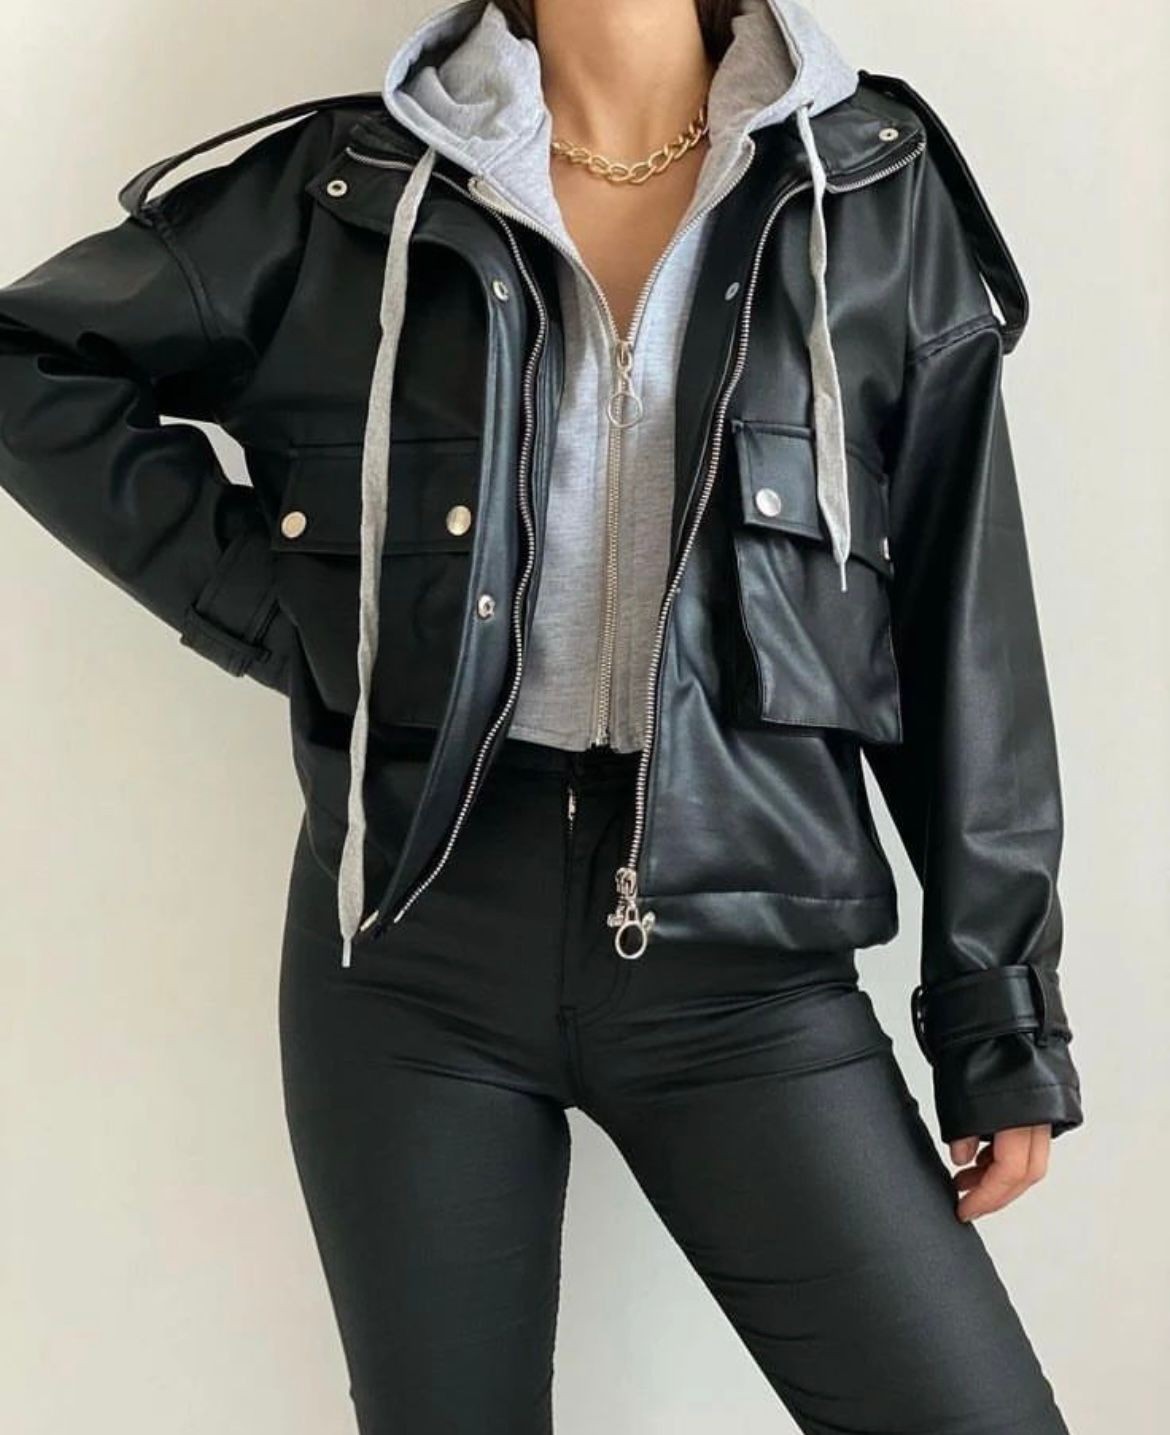 Bell Hooded Leather Jacket